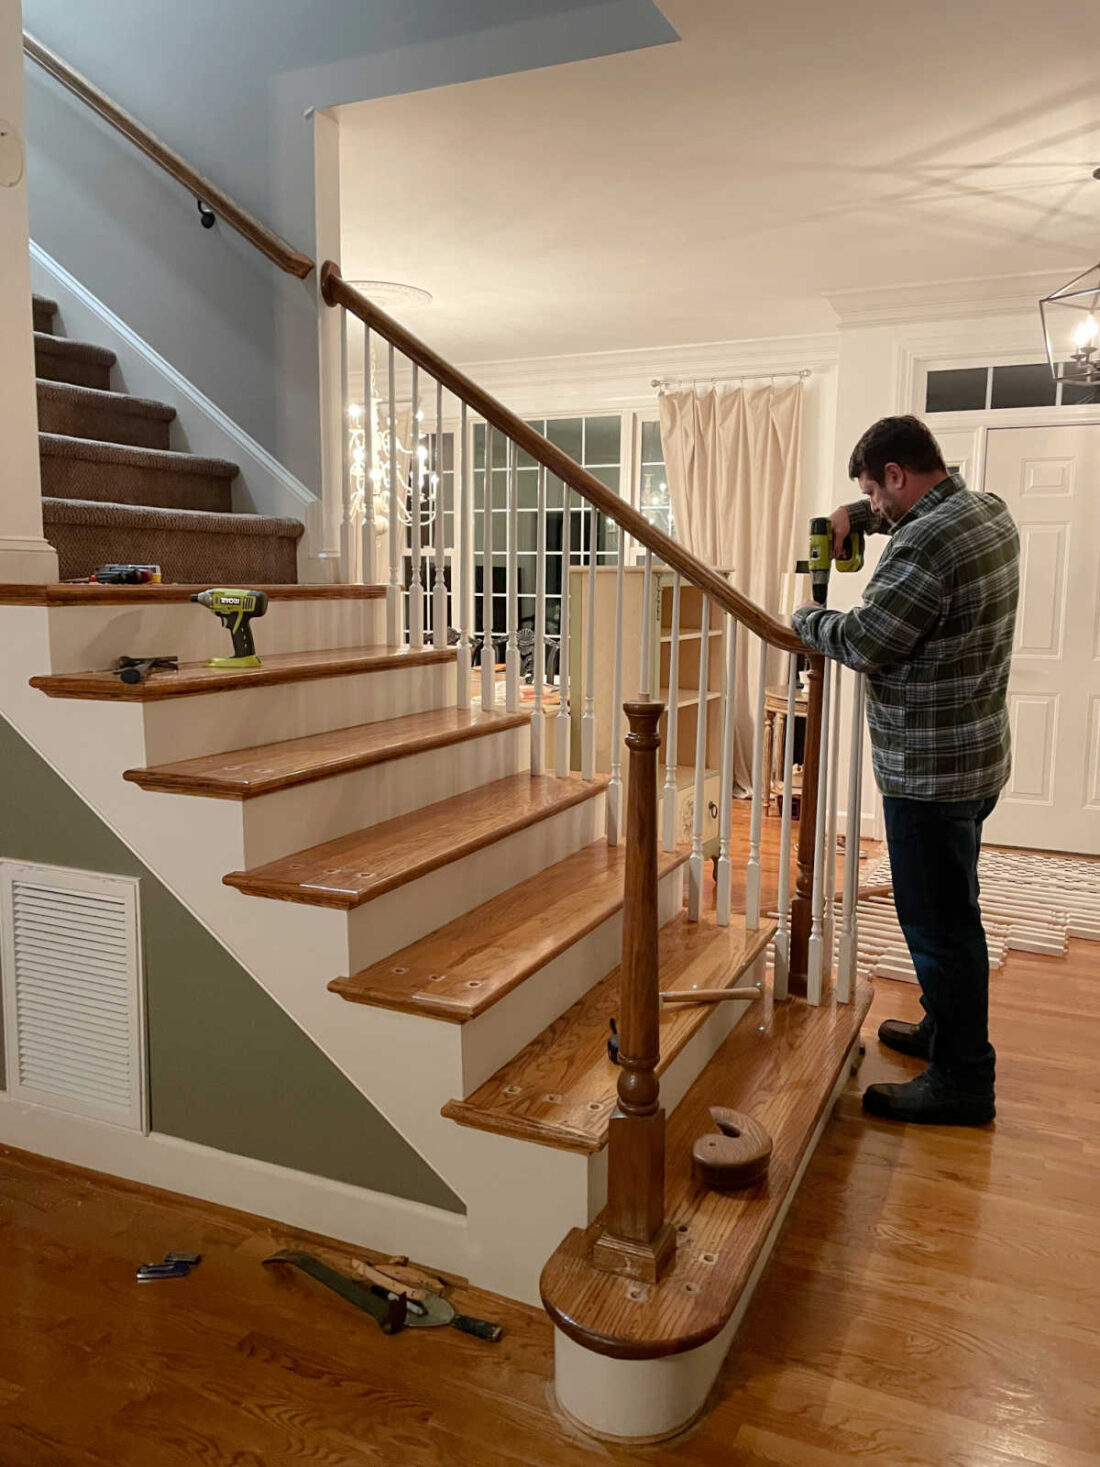 Drilling out staircase handrails during demo